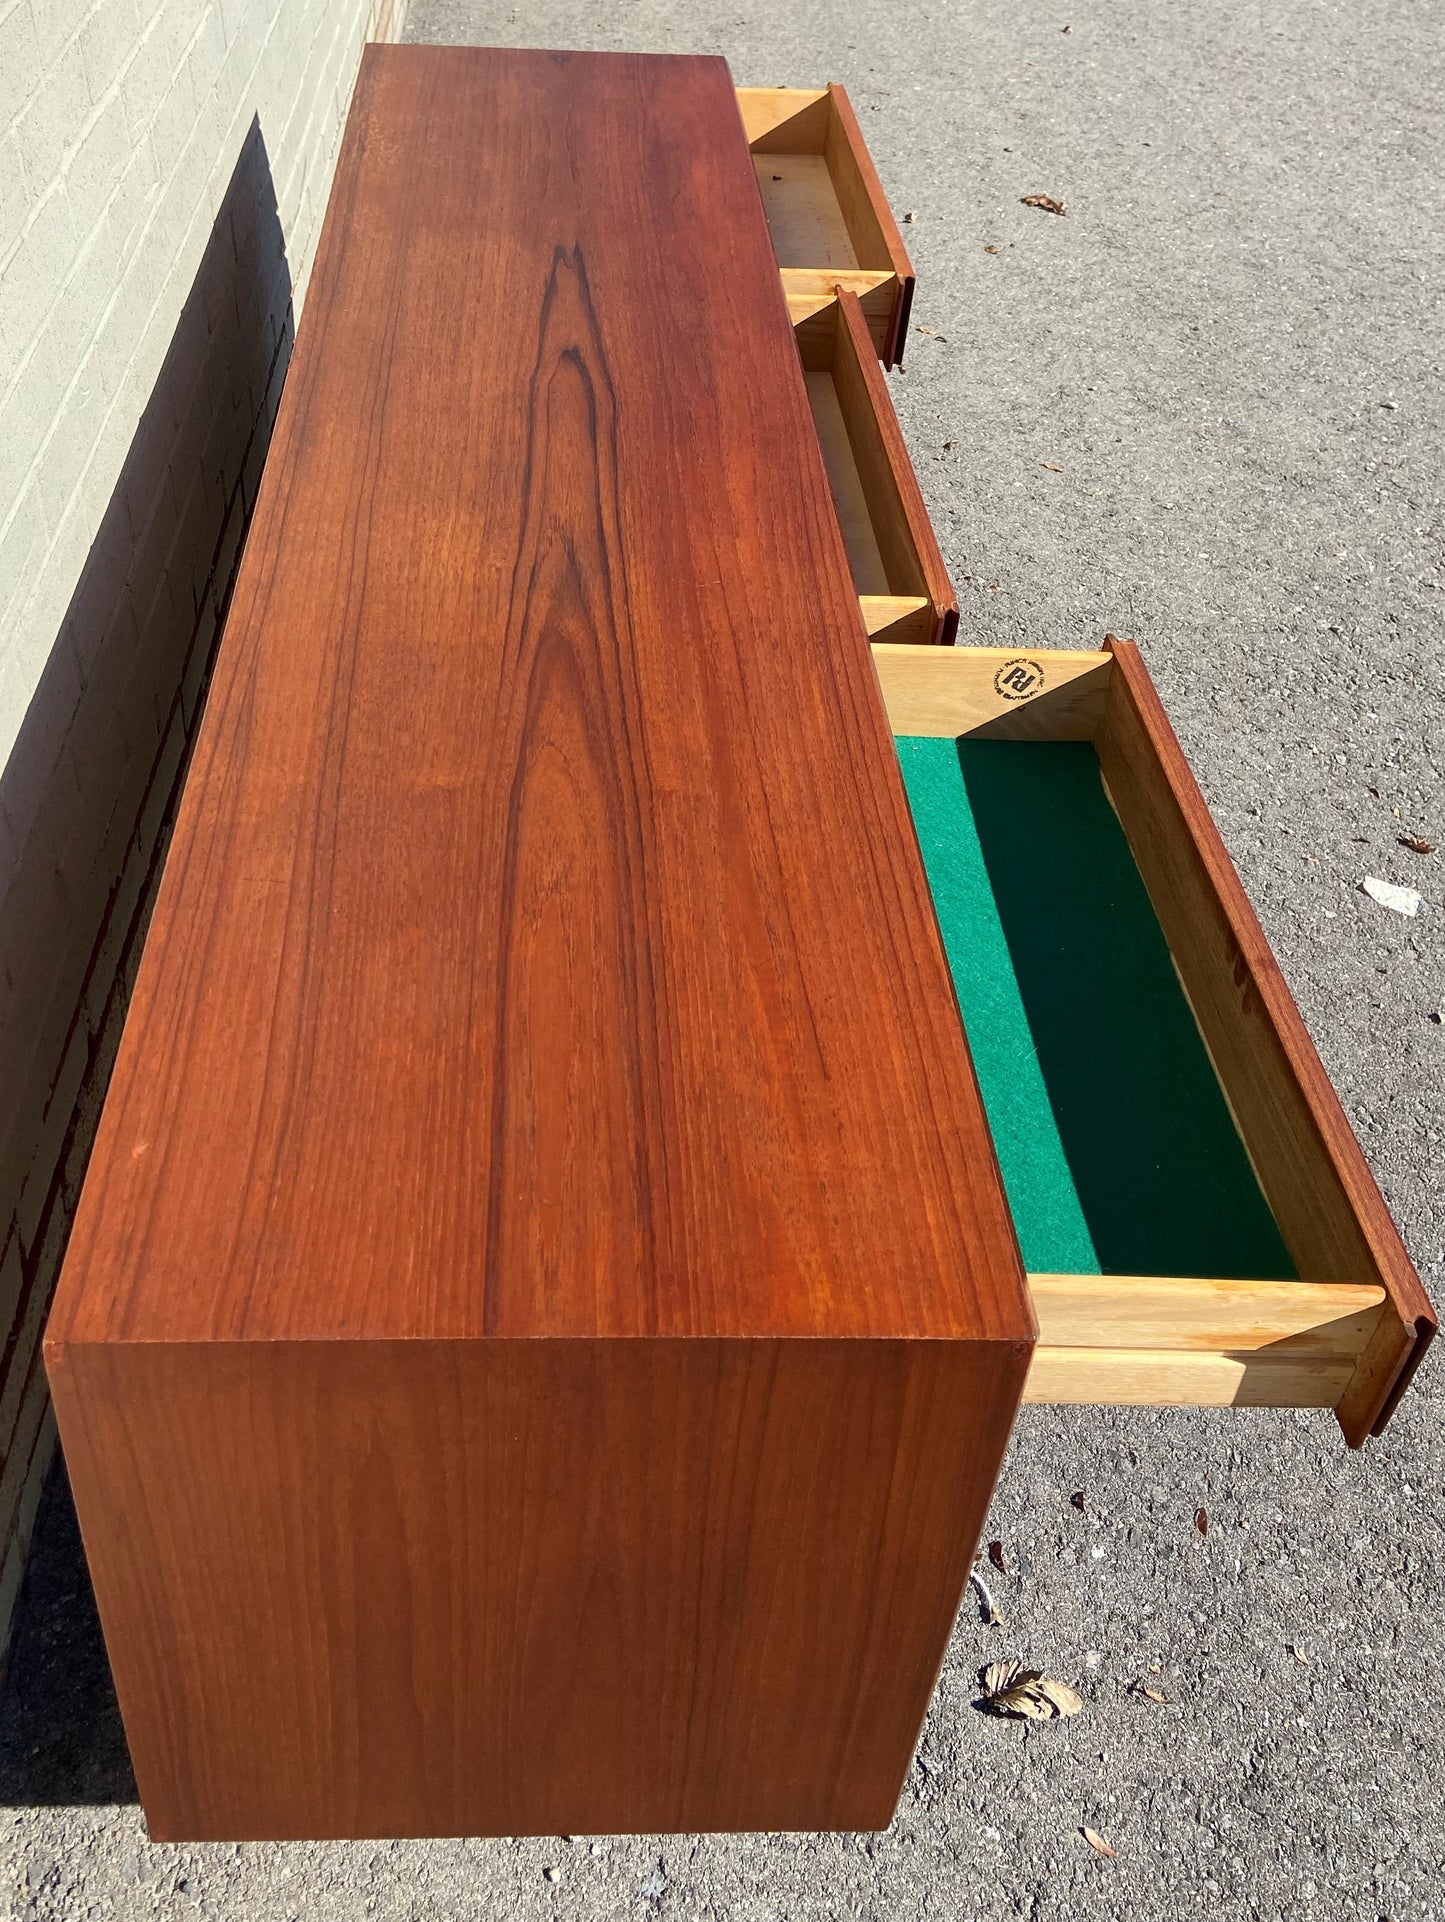 REFINISHED Mid Century Modern Teak Sideboard by Punch 72"